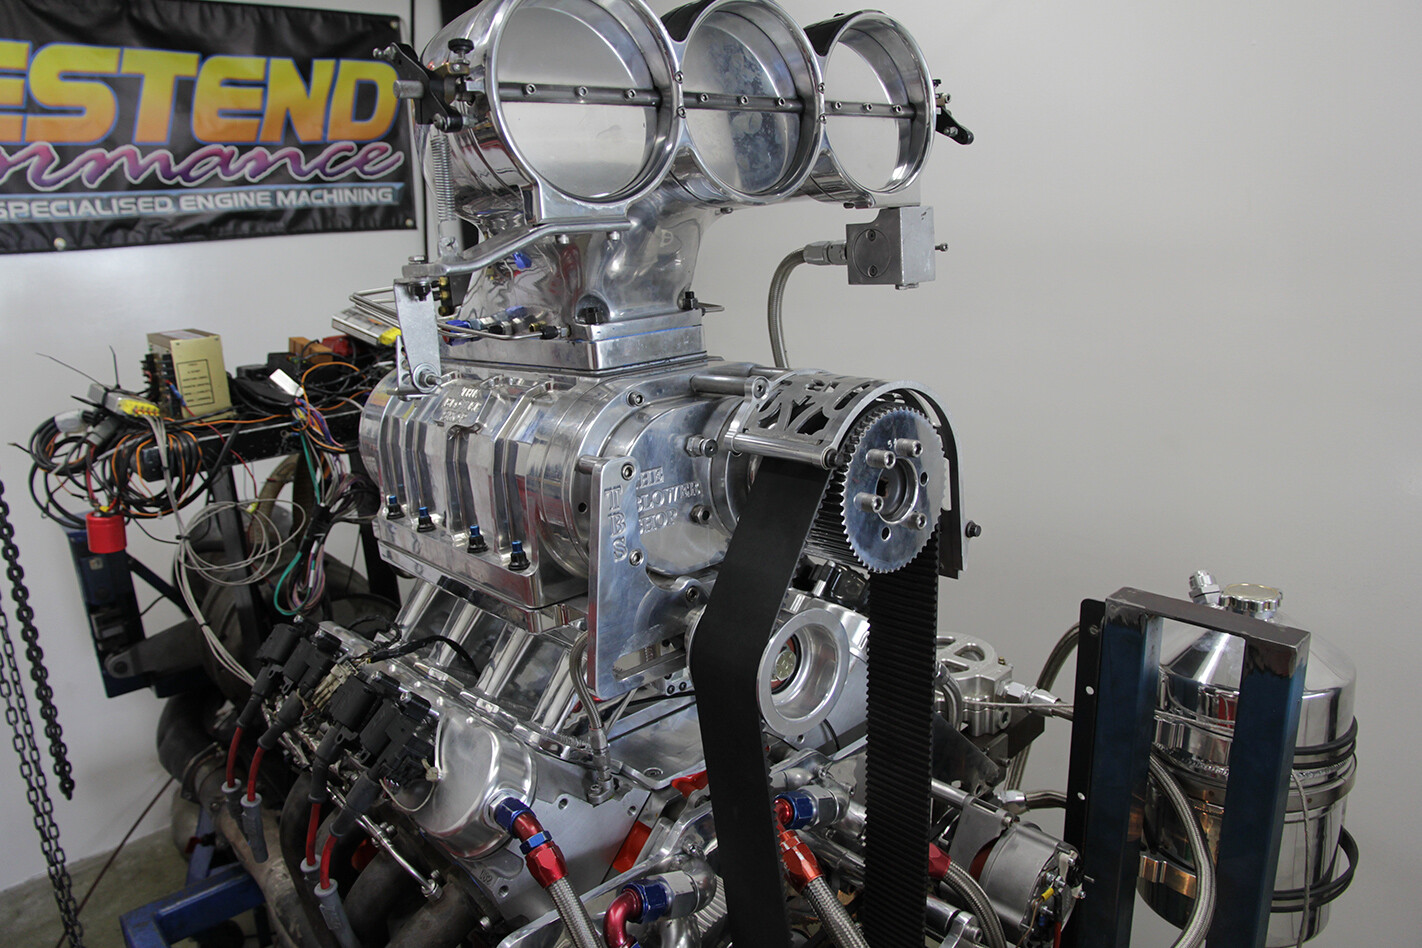 Martin Tooth's Holden one-tonner engine